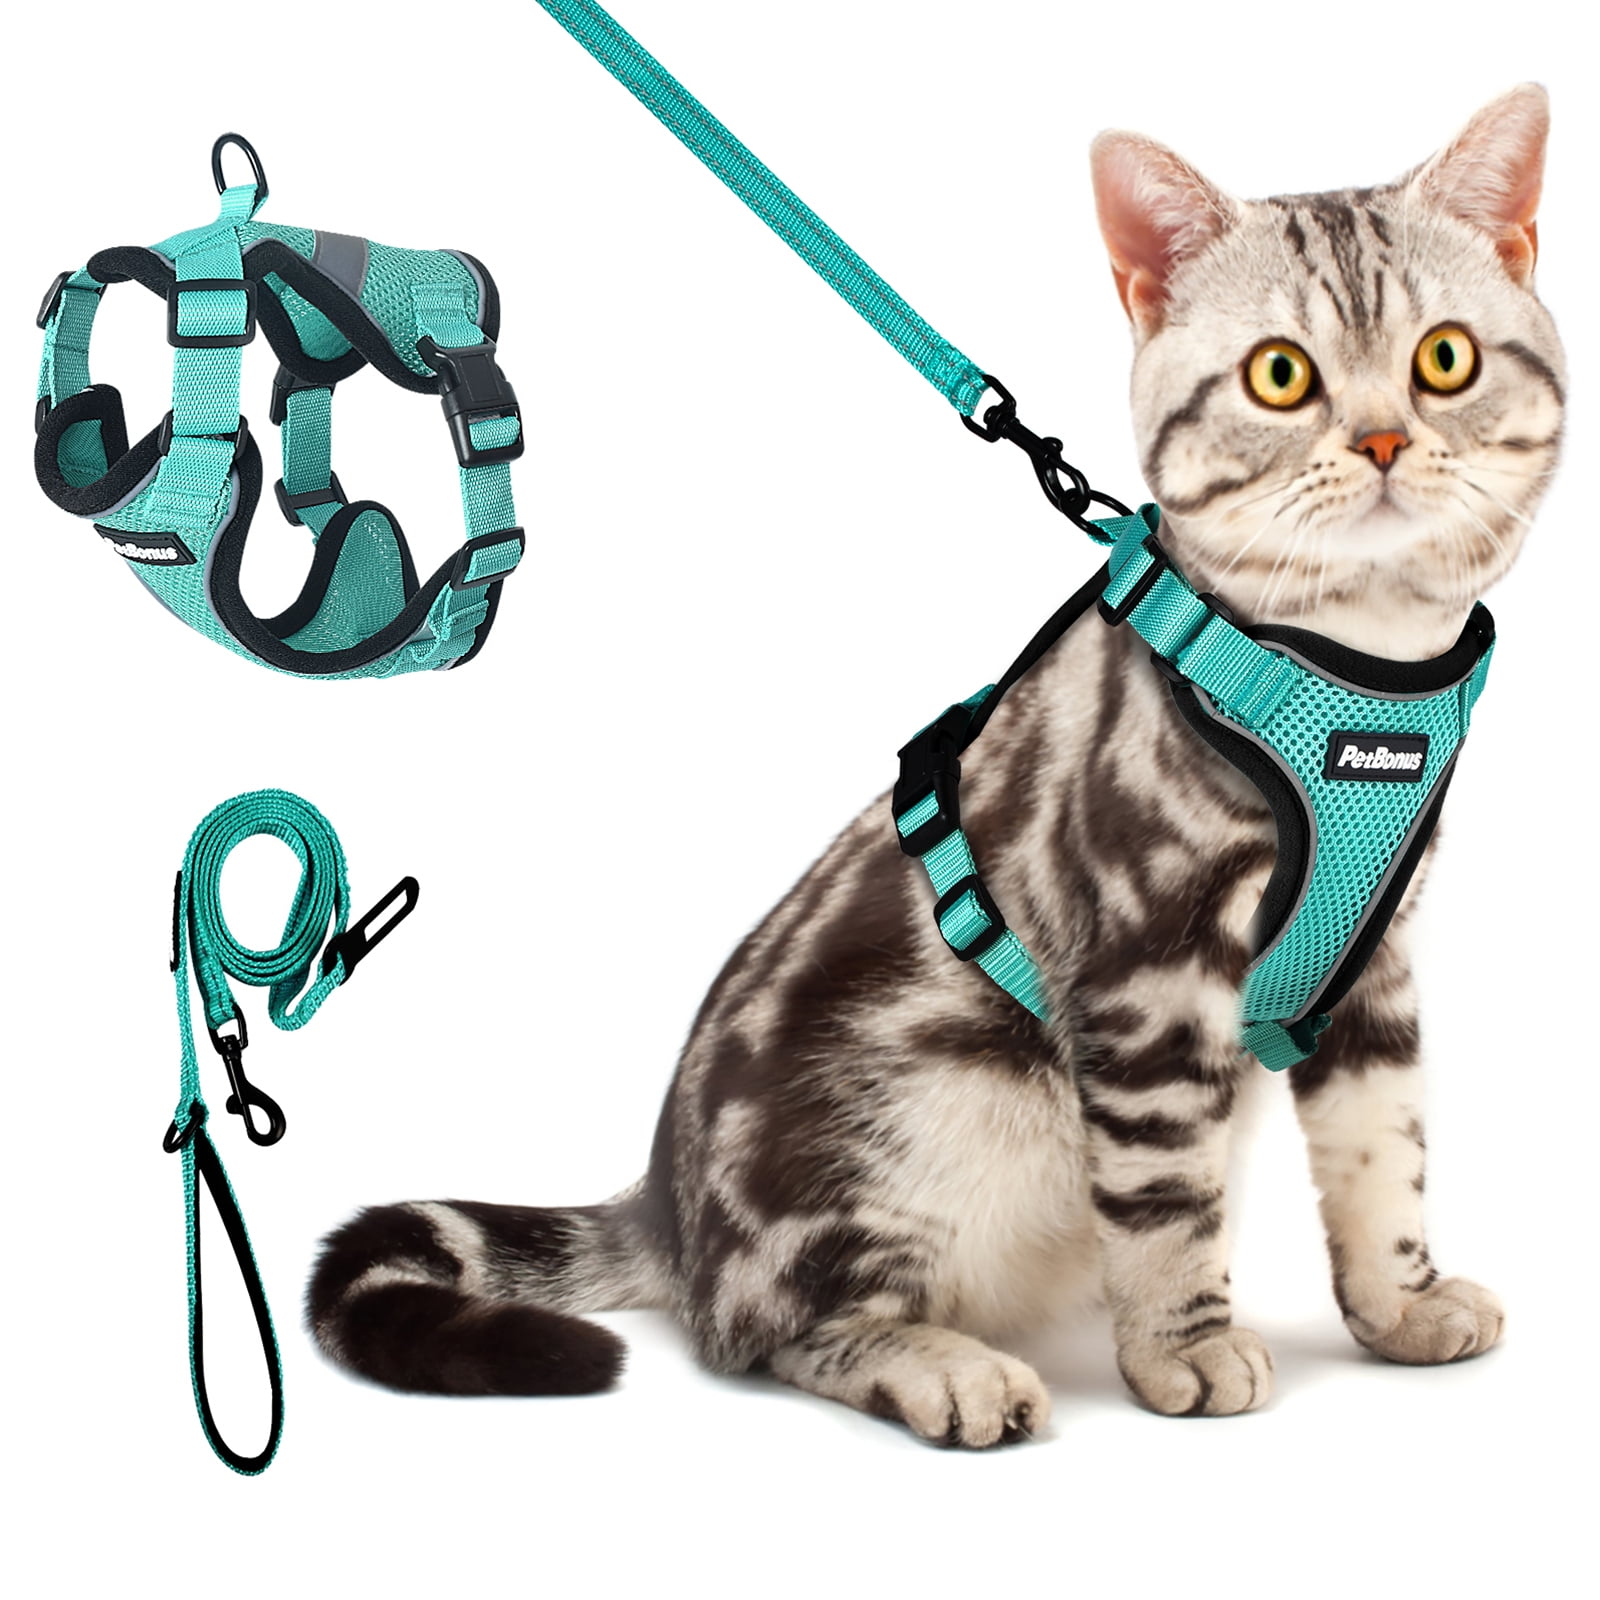 PetBonus 2 Pack Cat Leashes, Reflective Walking Nylon Leash, Escape Proof  Clip and Cat Seat Belt, Pet Leash with 360 Degree Swivel Clip for Kittens,  Puppies, Rabbits, Small Animals Black, Black